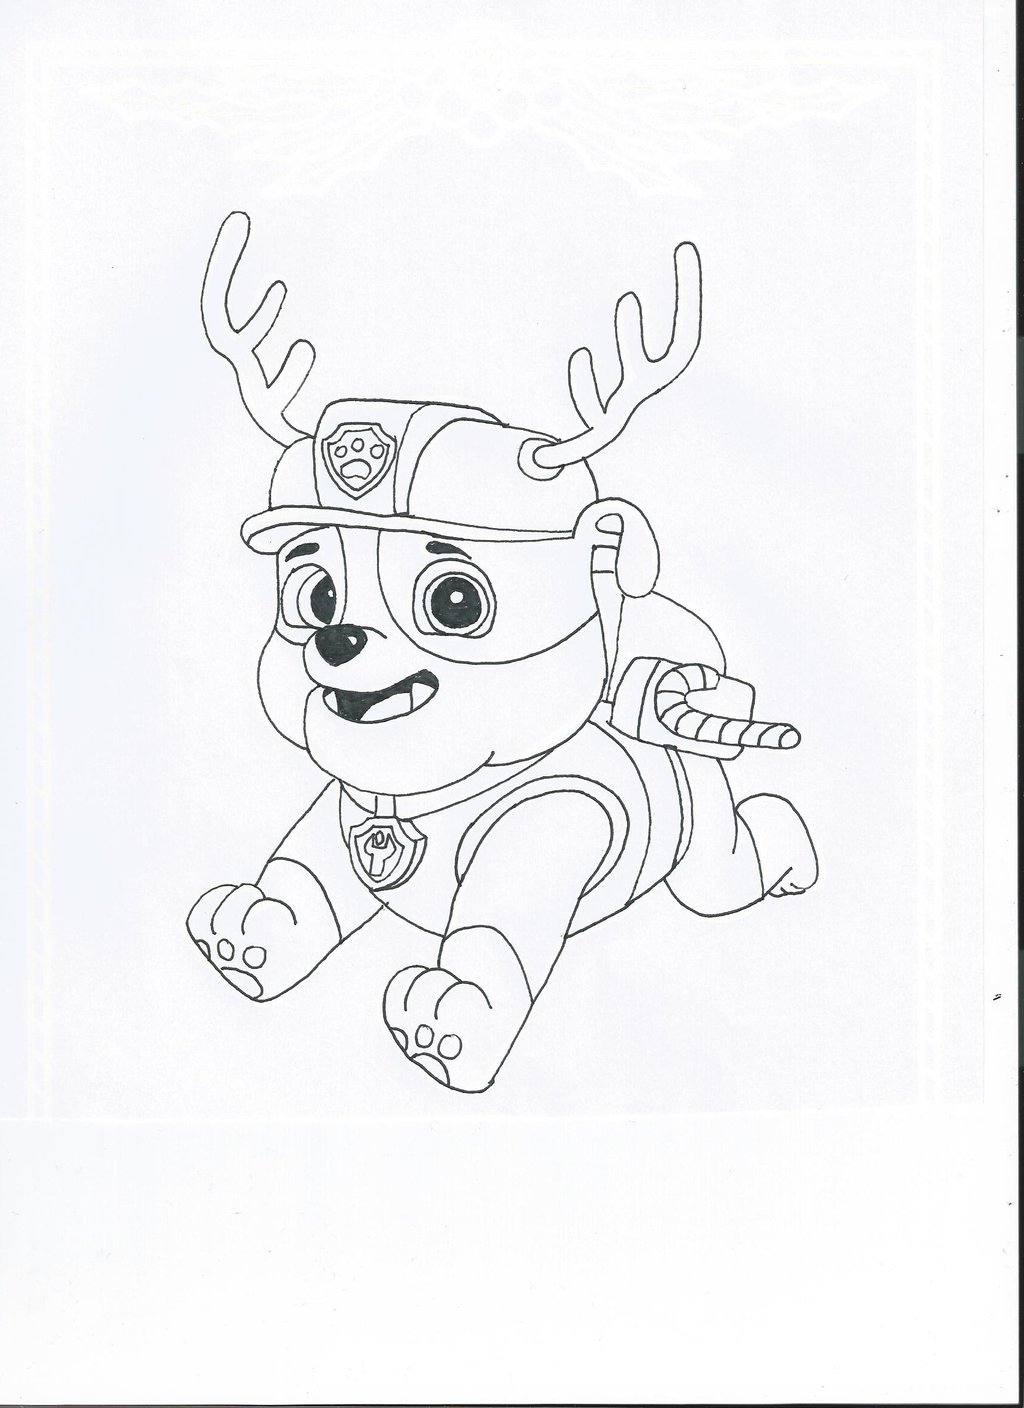 Coloring Pages : Outstanding Christmas Paw Patrol Coloring Pages Christmas  Paw Patrol Coloring Pages Free Printable Adults‚ Christmas Paw Patrol  Coloring Pages Free Printable For Kids‚ Paw Patrol Coloring Pages as well